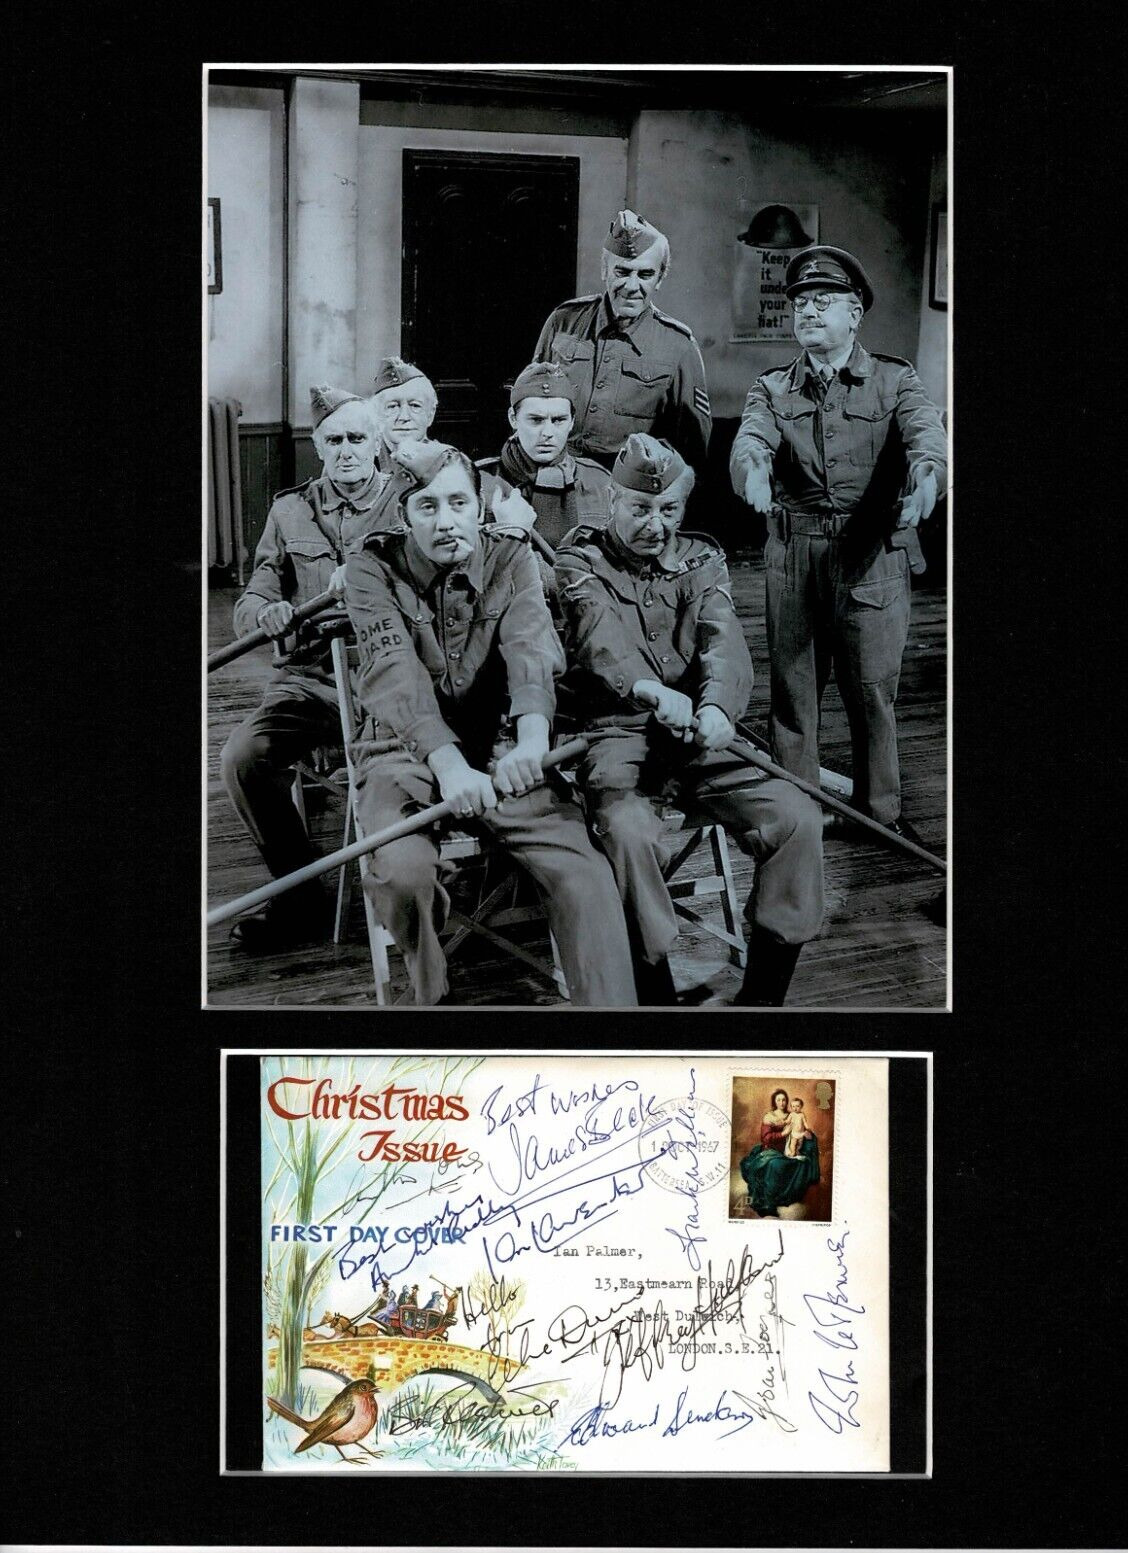 DADS ARMY AUTOGRAPH DISPLAY SIGNED BY 11 ARTHUR LOWE JAMES BECK JOHN LE MESURIER